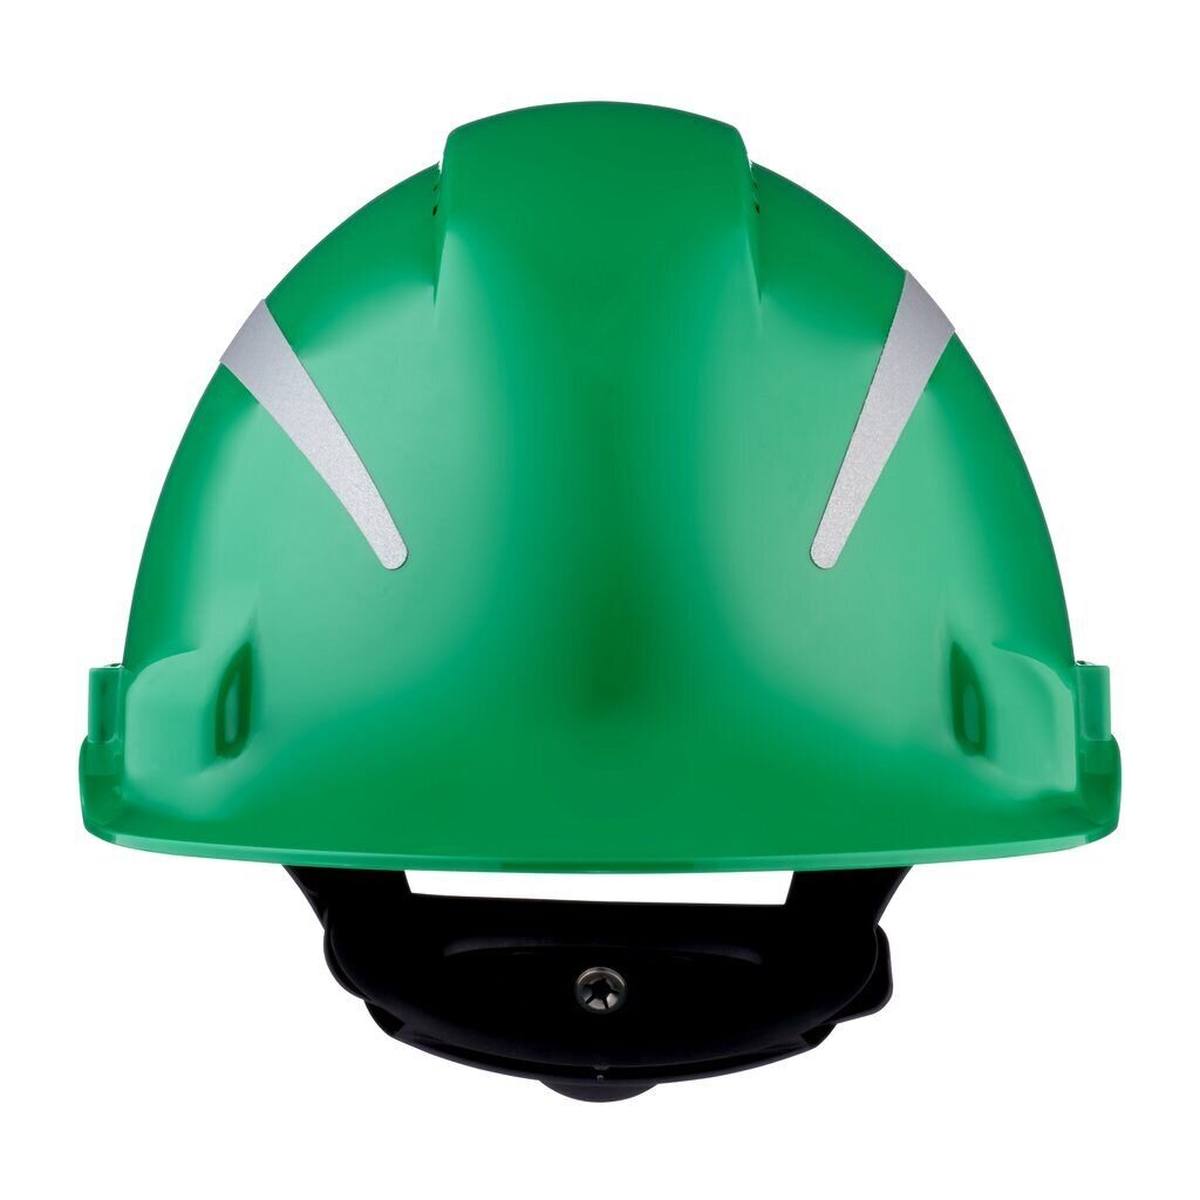 3M G3000 safety helmet with UV indicator, green, ABS, ventilated ratchet fastener, plastic sweatband, reflective sticker